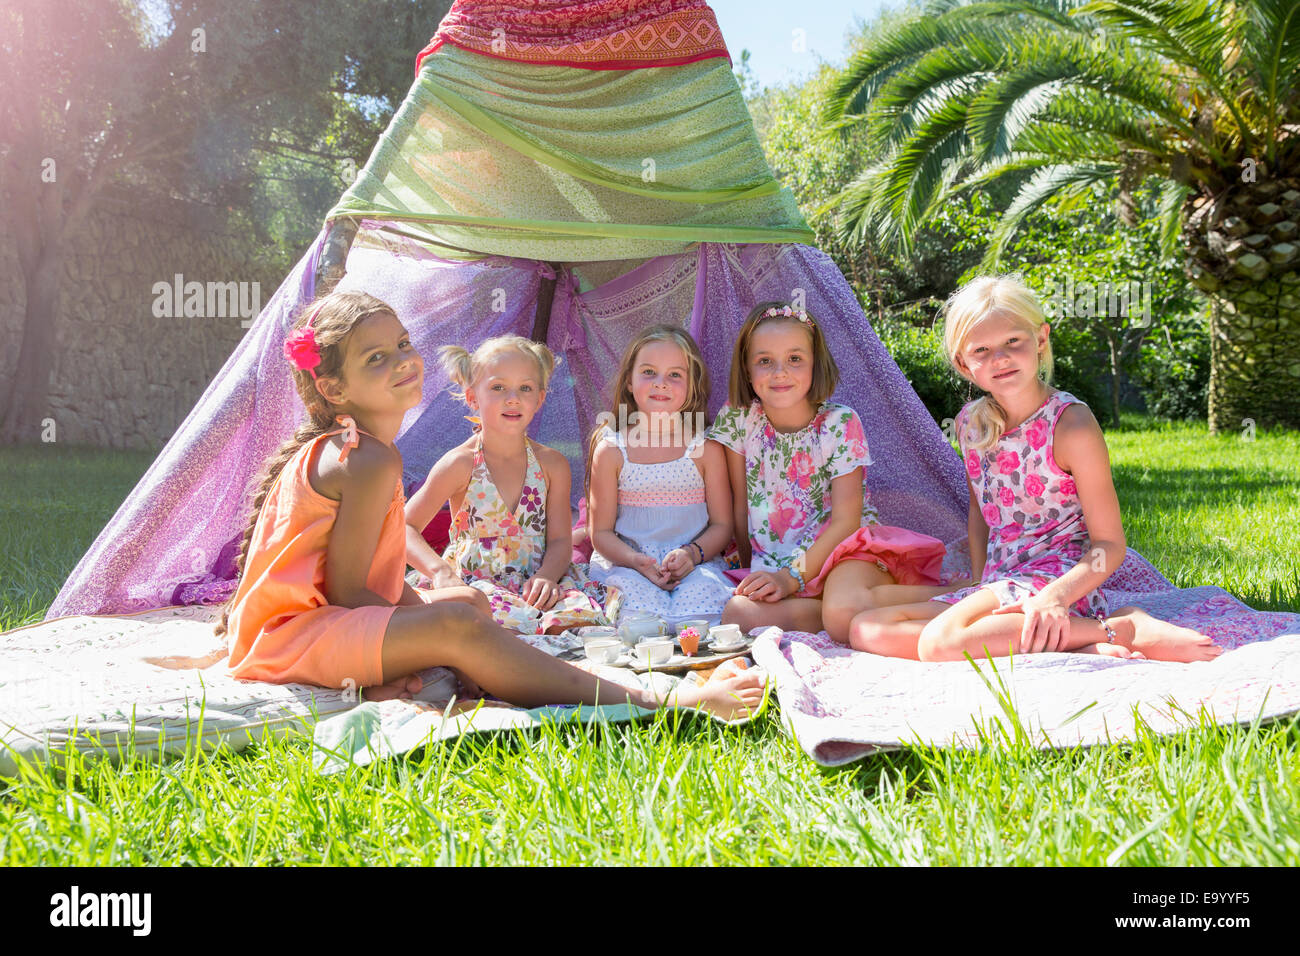 Portrait of five girls in front of teepee Stock Photo